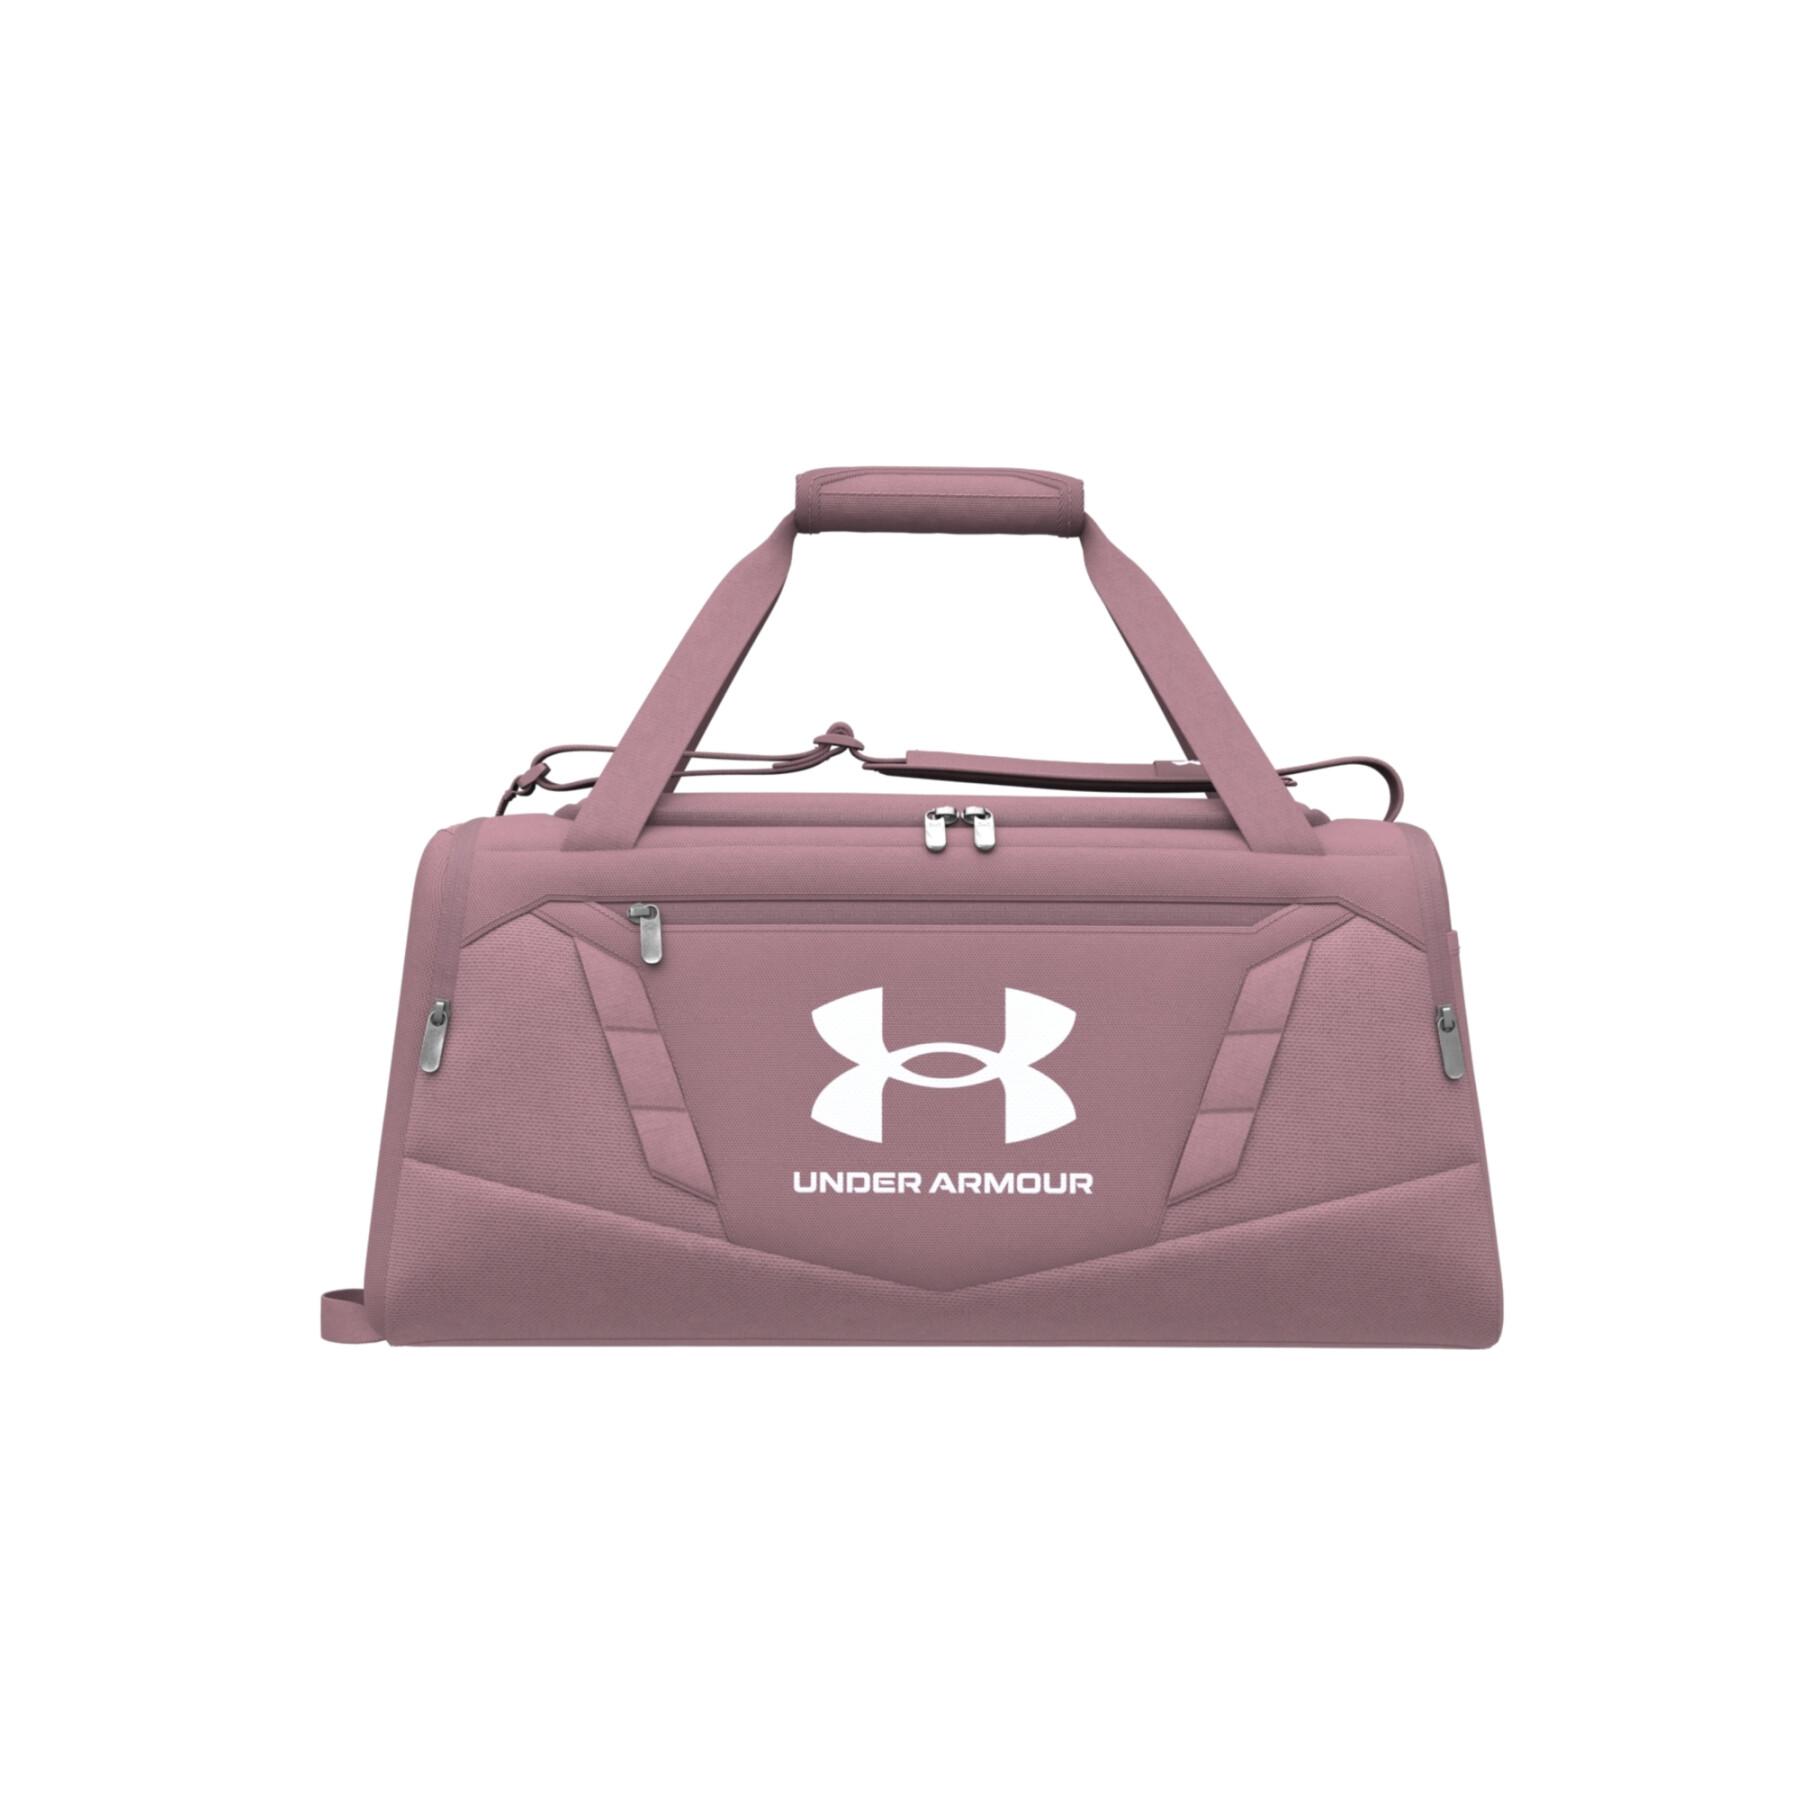 Sports bag Under Armour Undeniable 5.0 (s)